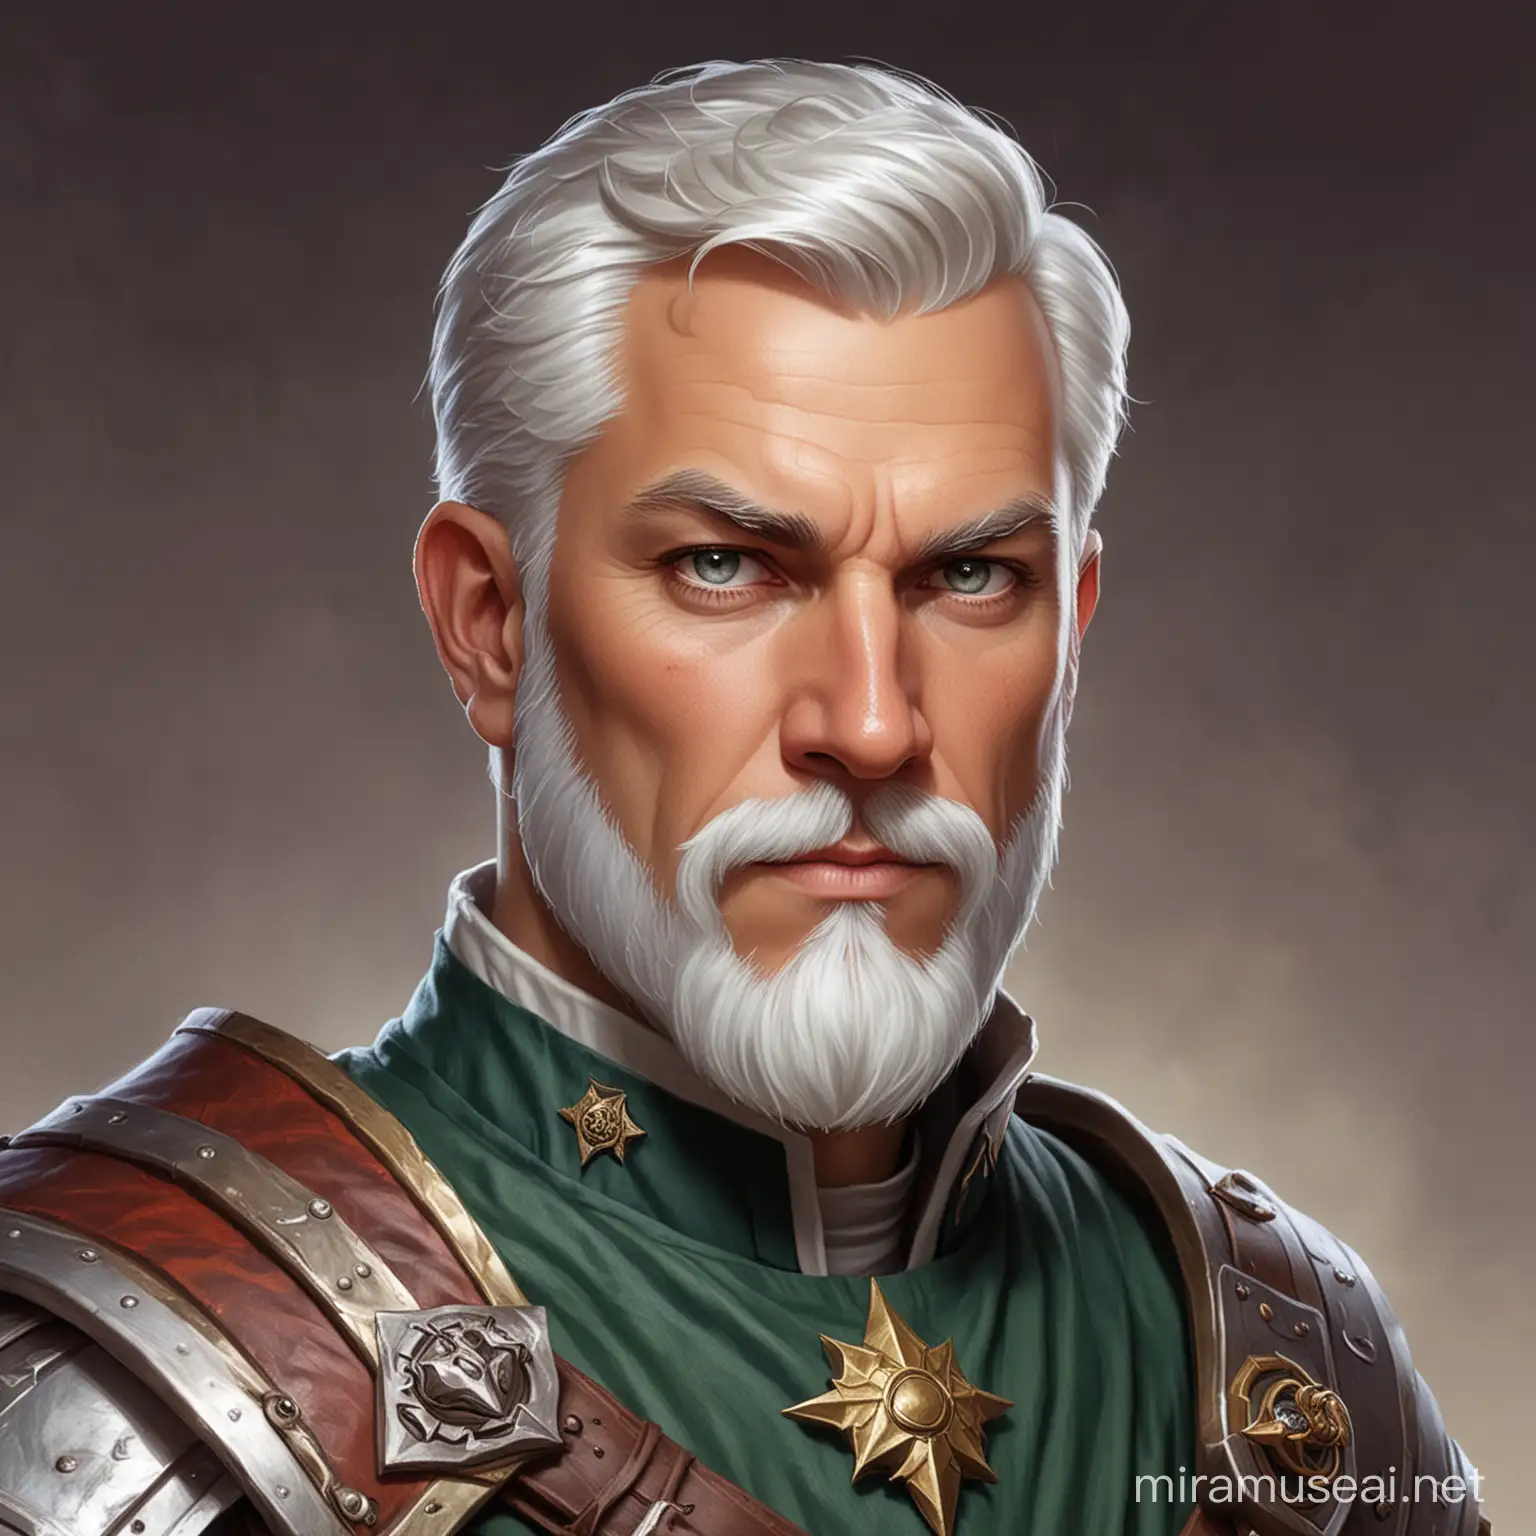 dungeons and dragons,white short hair, short beard, honorable, ex-military, executive charismatic man